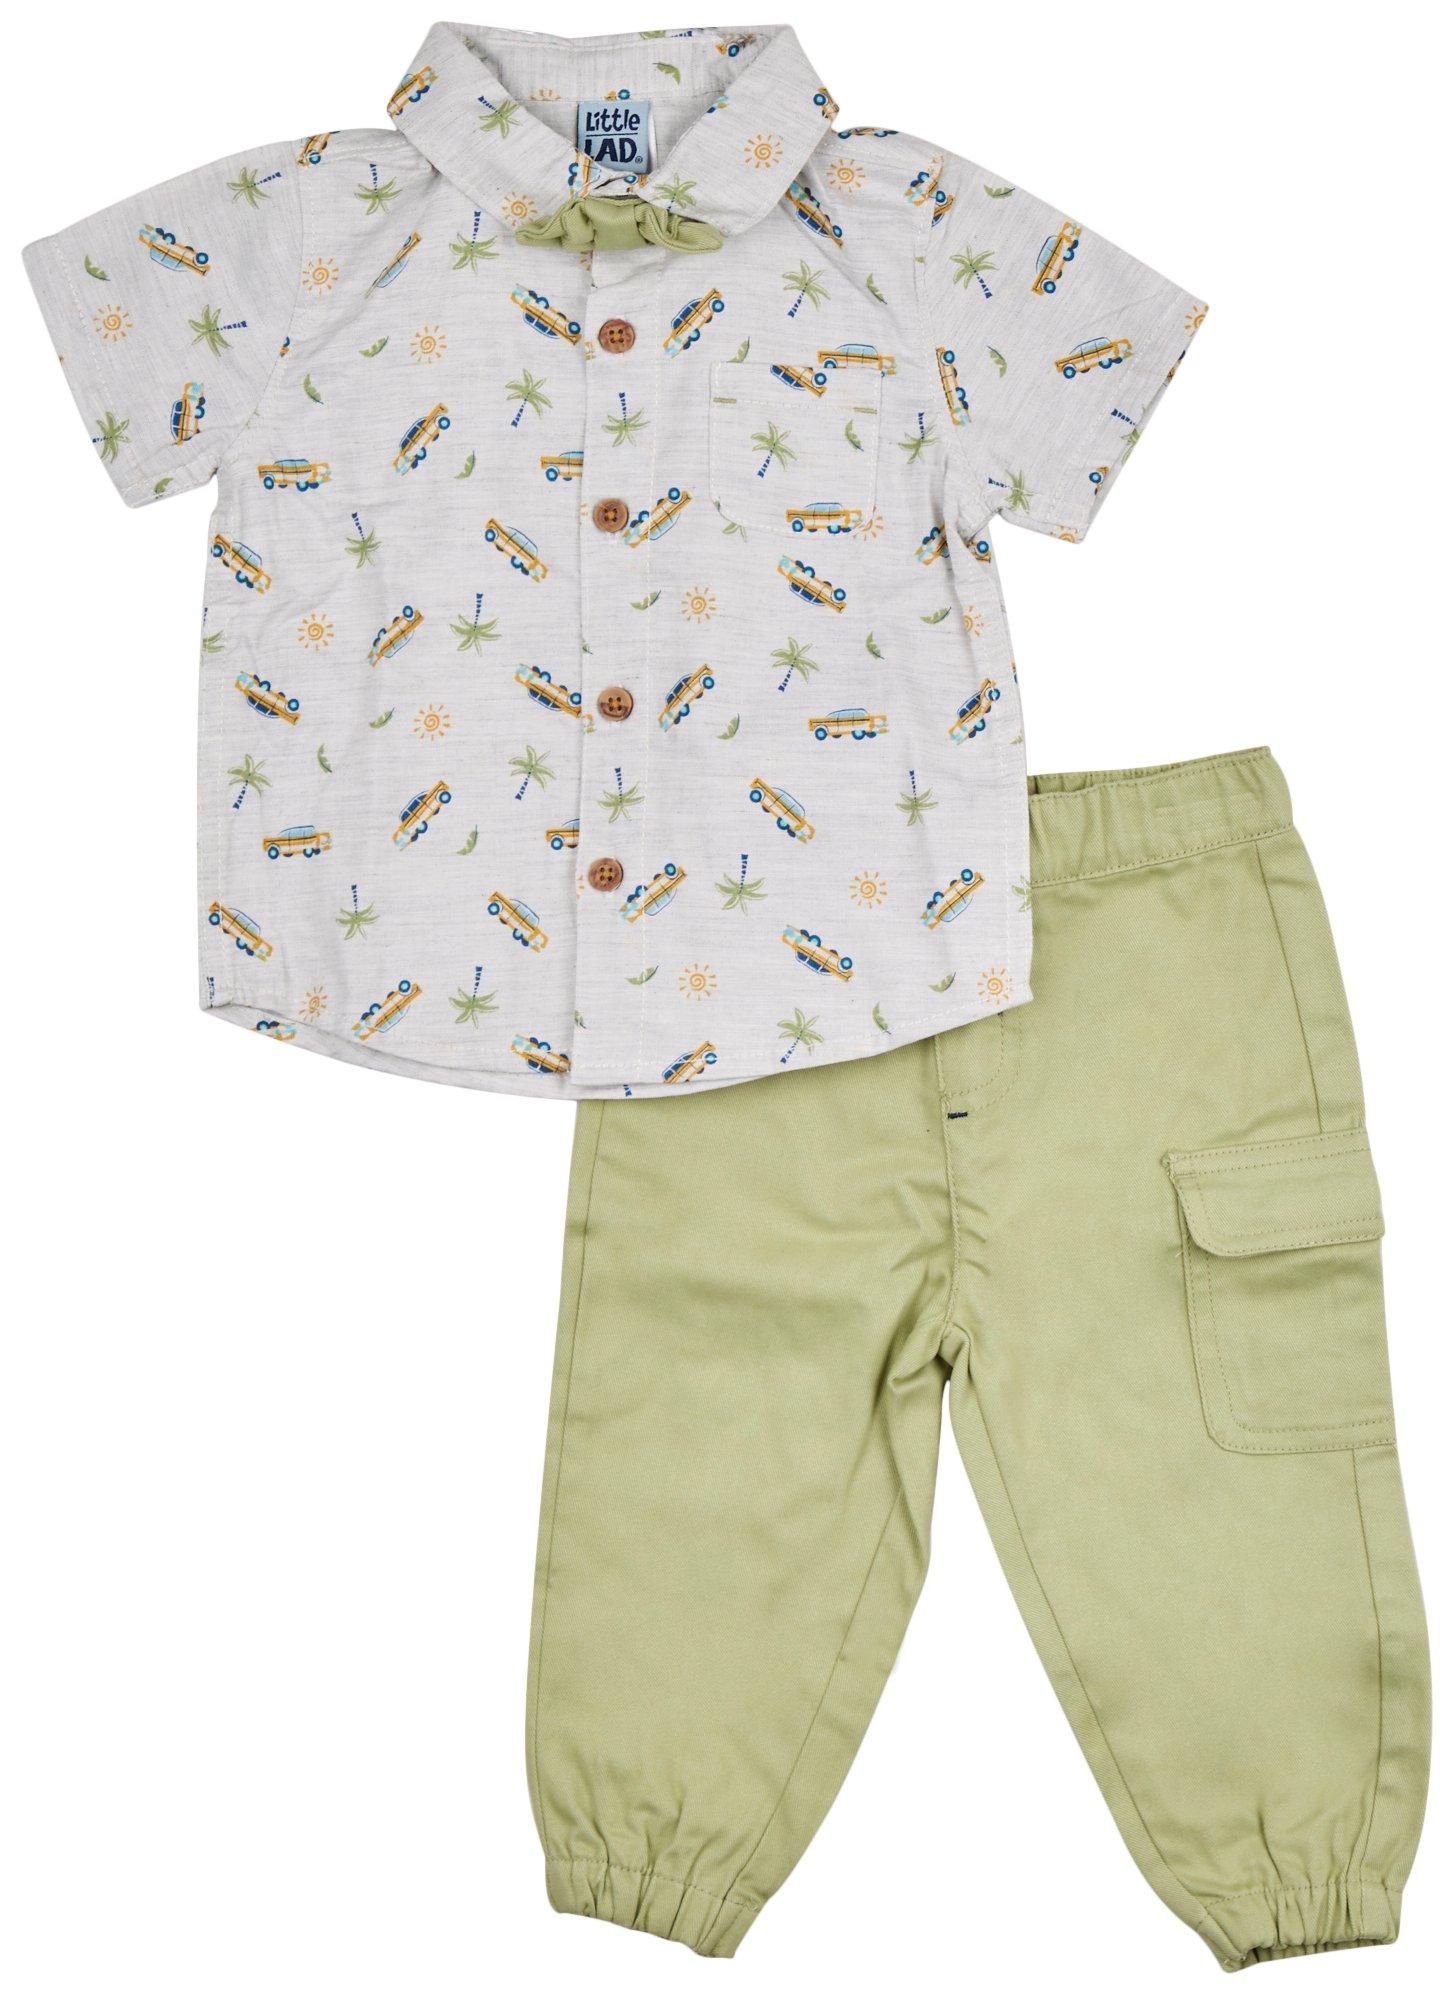 Little Lad Baby Boys 3-Pc. Woven Shirt Bow Tie And Pant Set